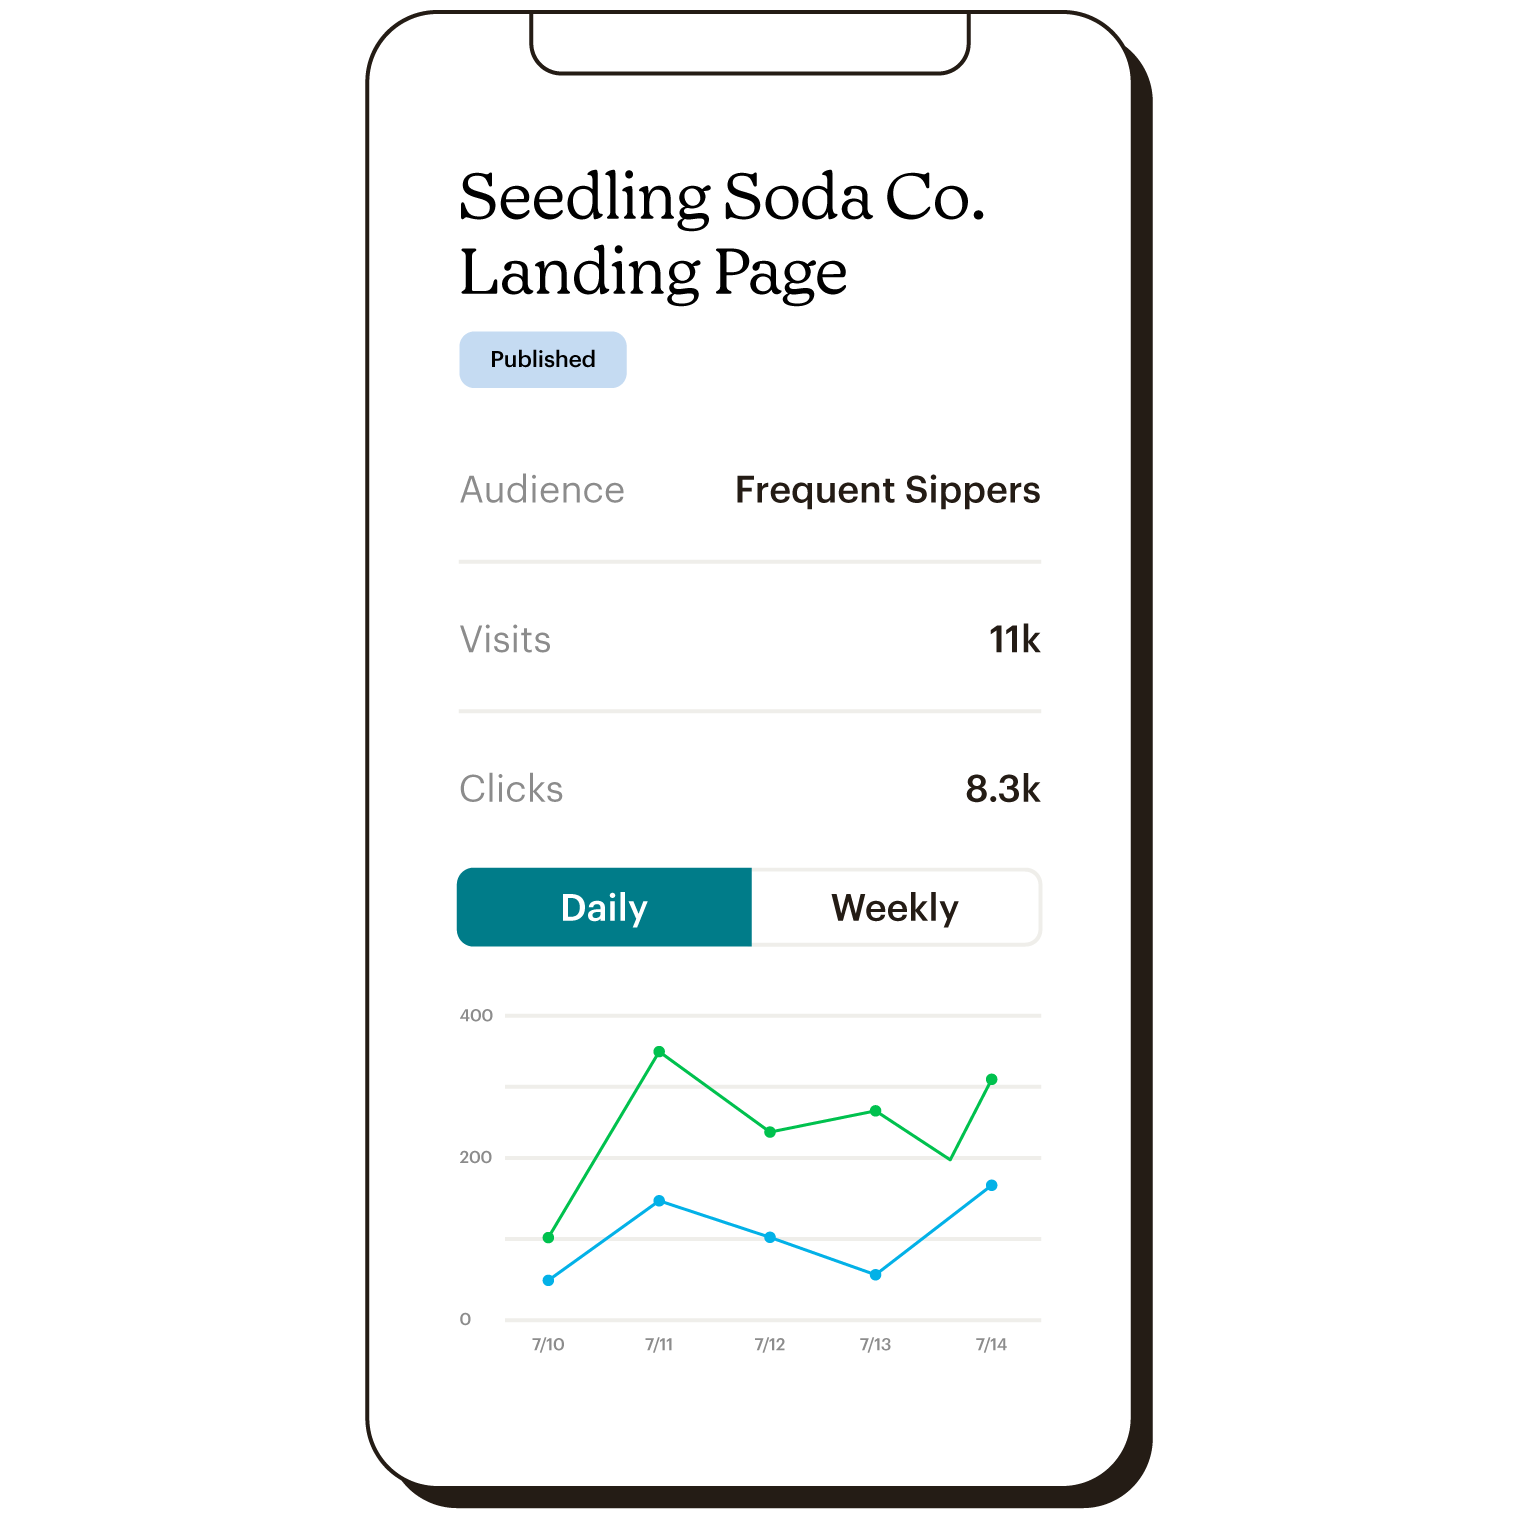 Mobile reports view of the Seedling Soda Co. Landing page. The report shows daily views and clicks.